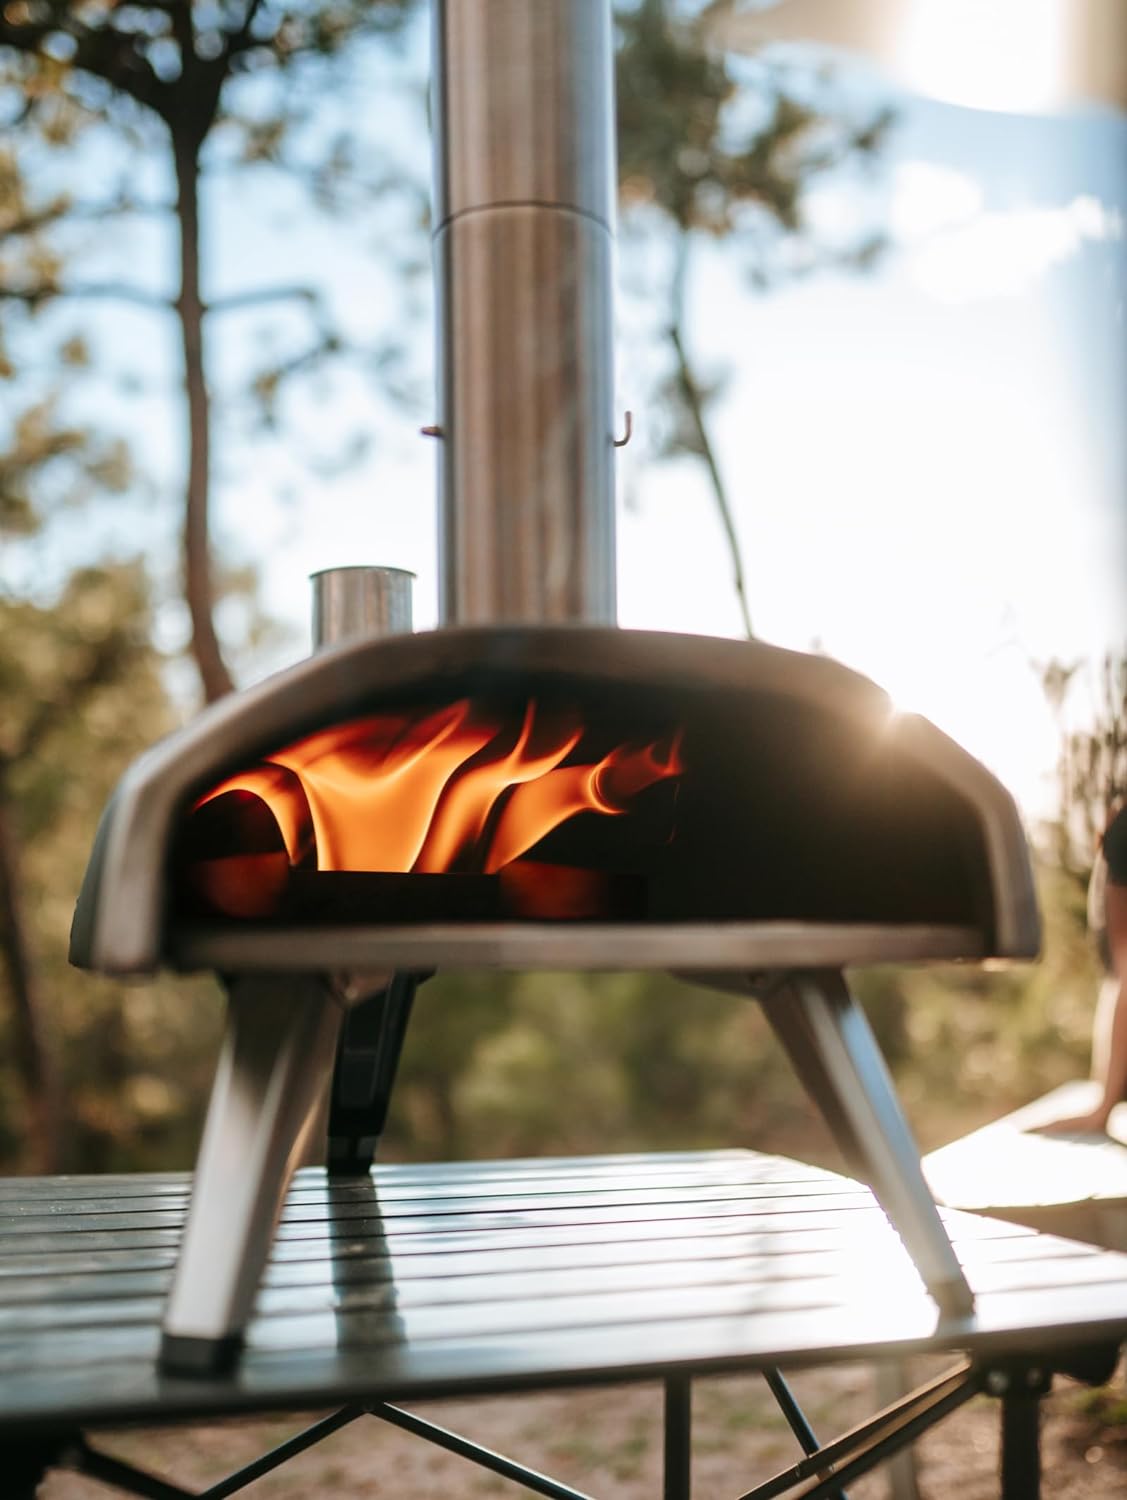 ooni Fyra 12 Wood Fired Outdoor Pizza Oven - Portable Hard Wood Pellet  Pizza Oven - Ideal for Any Outdoor Kitchen - Outdoor Cooking Pizza Maker -  Backyard Pizza Ovens - Countertop Pizza Oven